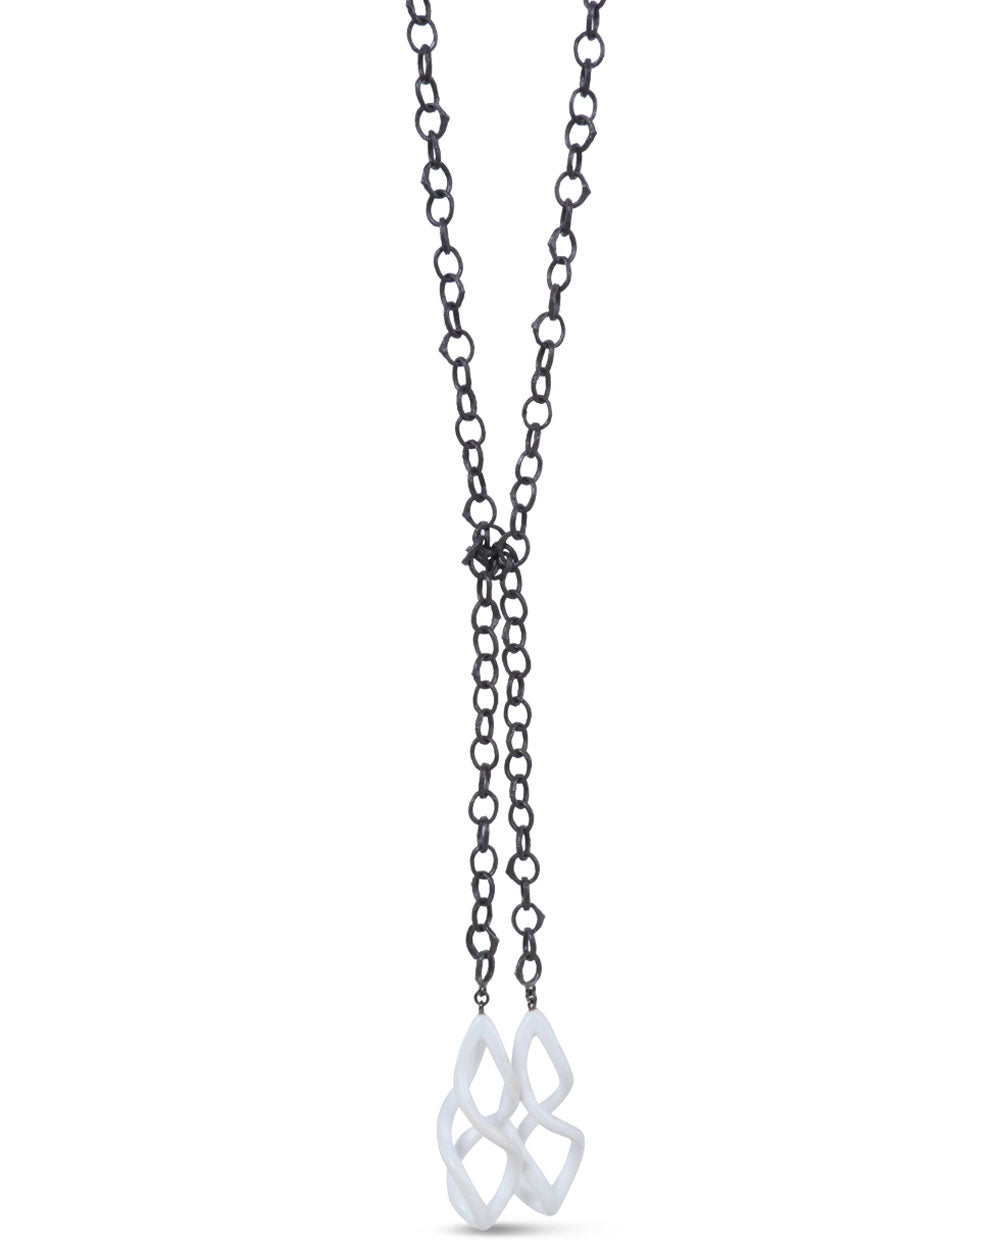 Cachalong Droplets Twig “O” Chain Necklace